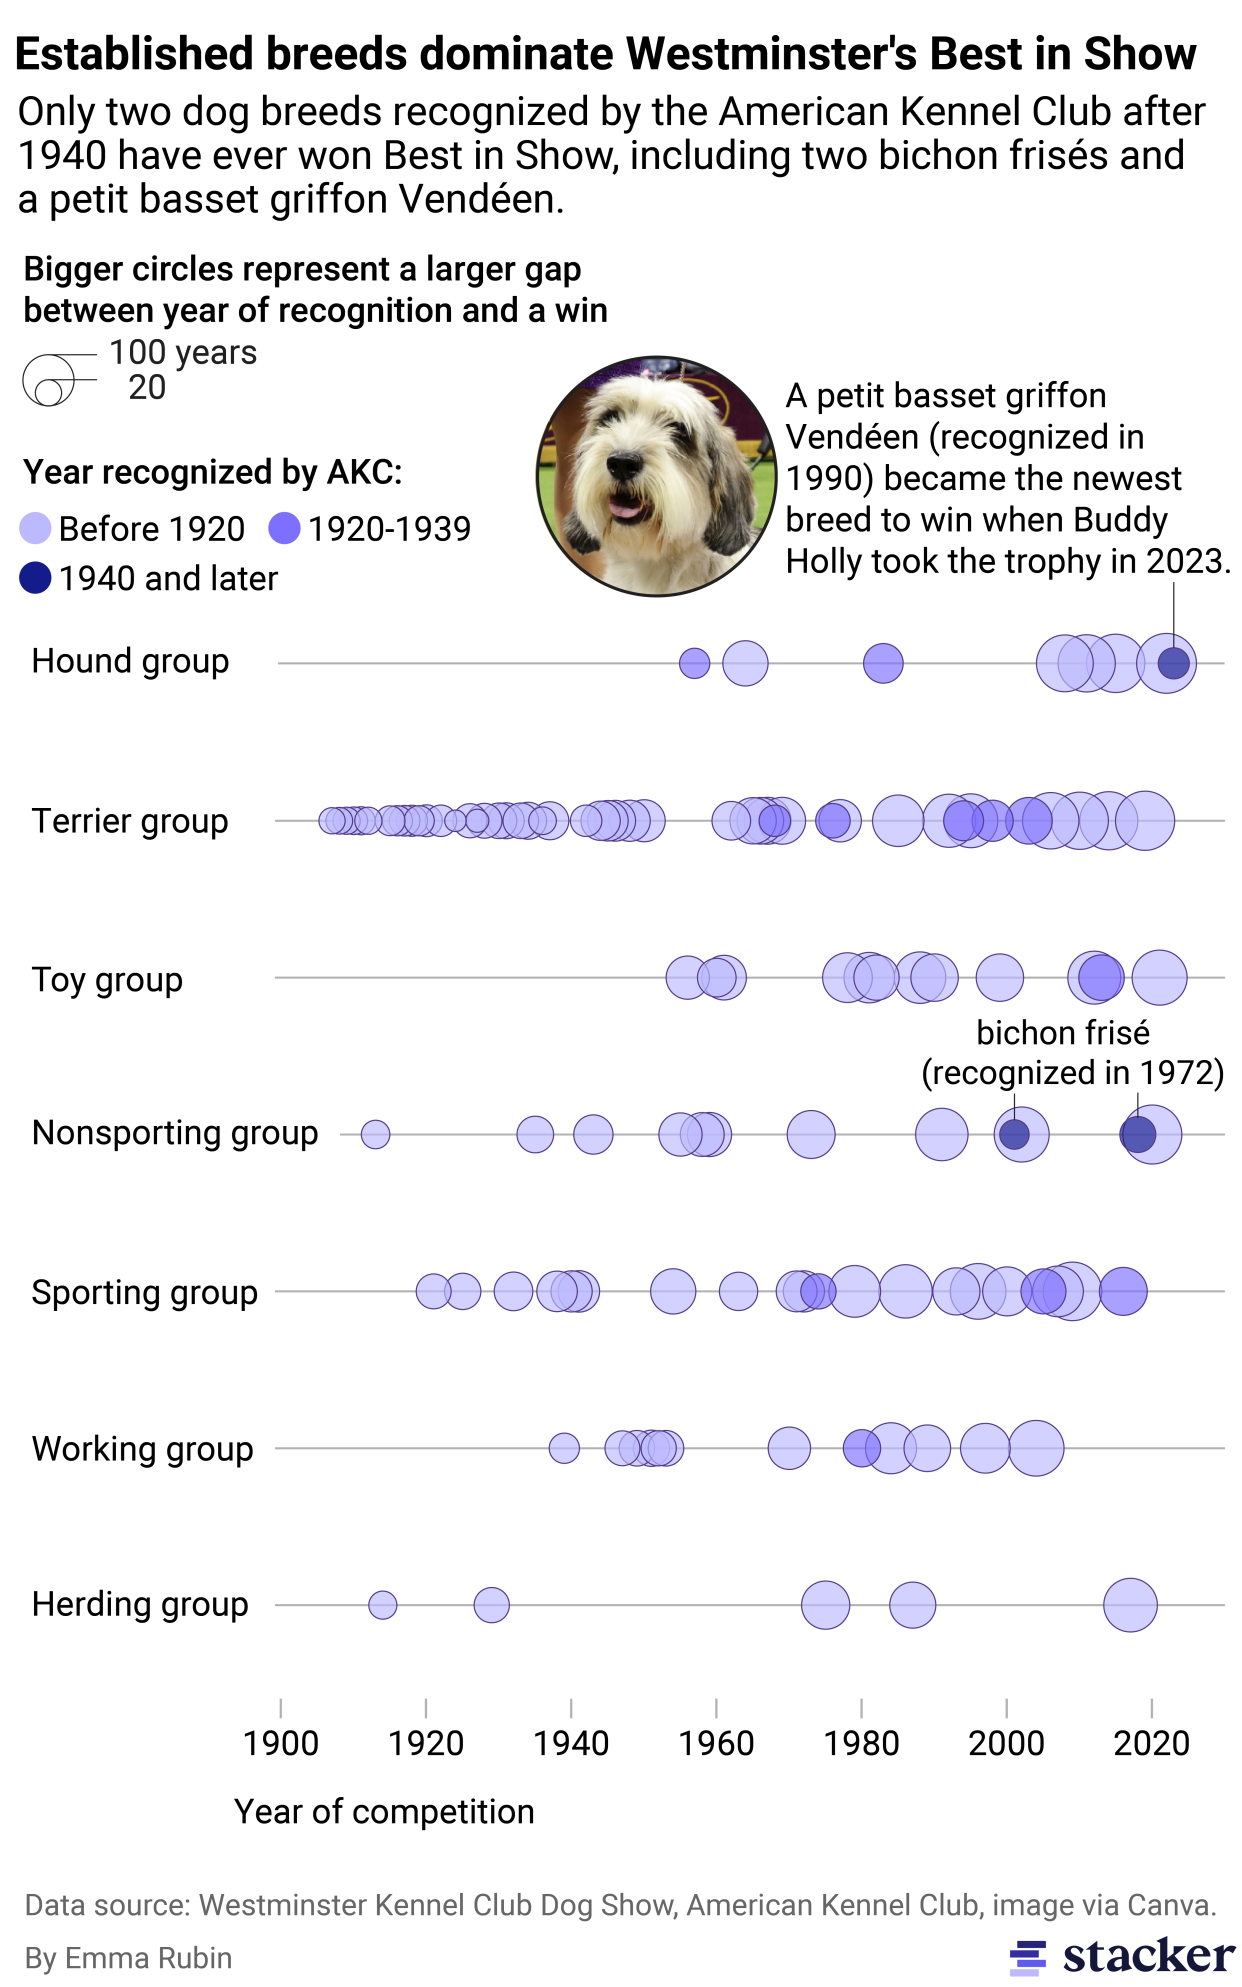 A bubble plot showing established breeds dominate Westminster's Best in Show competition. Only two breeds recognized by AKC after 1940 have ever won, two bichon frisé and petit basset griffon Vendéen.